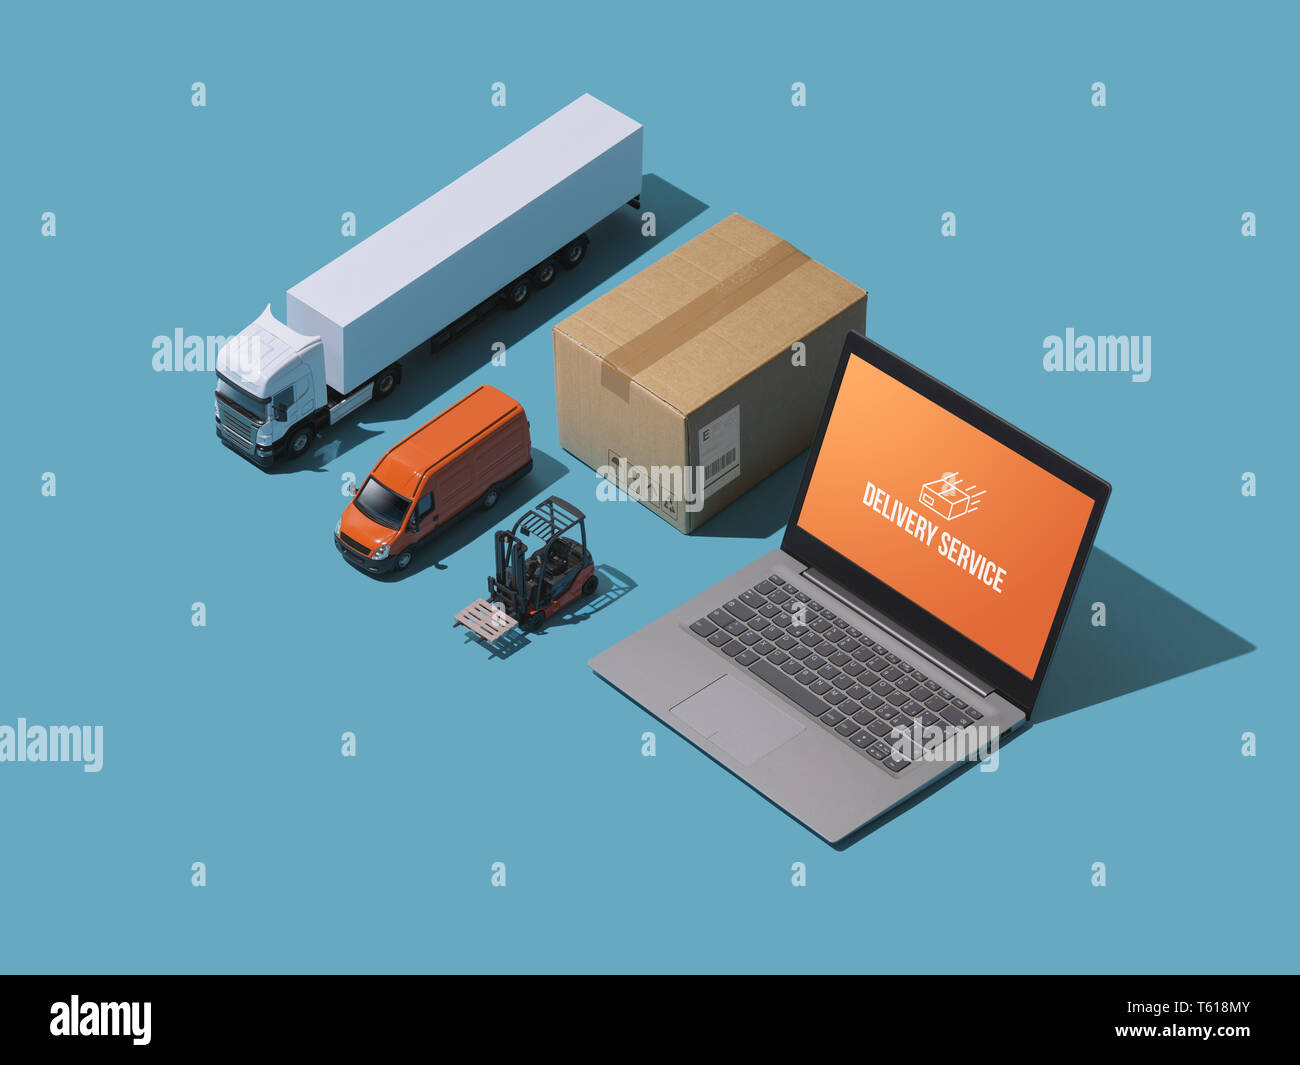 Professional express delivery, warehousing and shipment service: isometric trucks, boxes and laptop Stock Photo